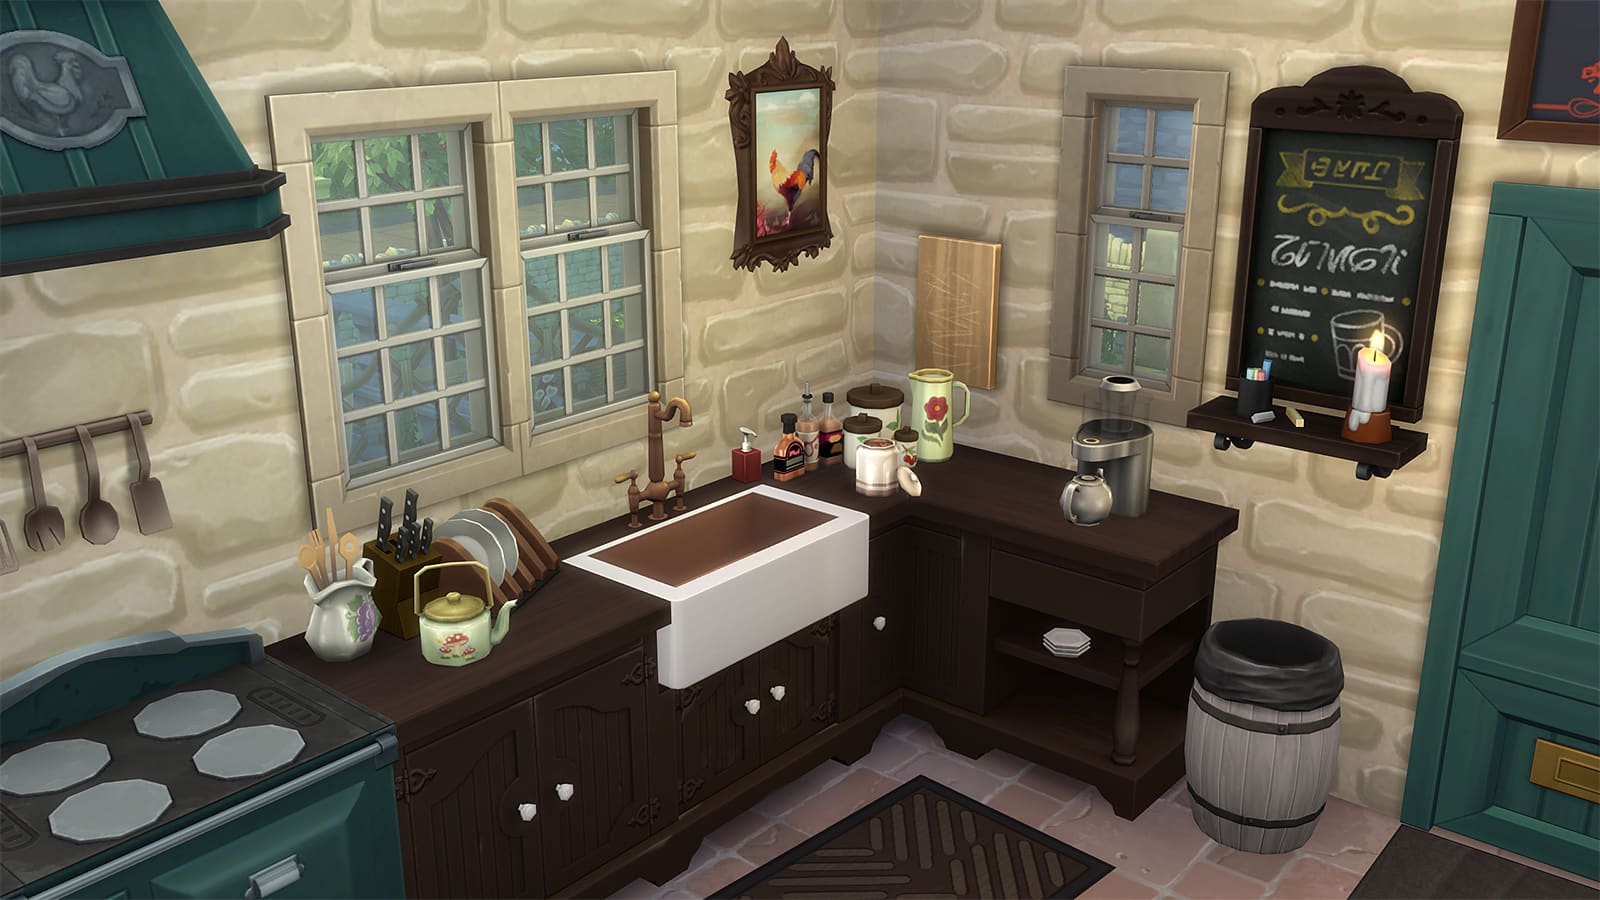 A kitchen in The Sims 4 using the OMSP shelf mod